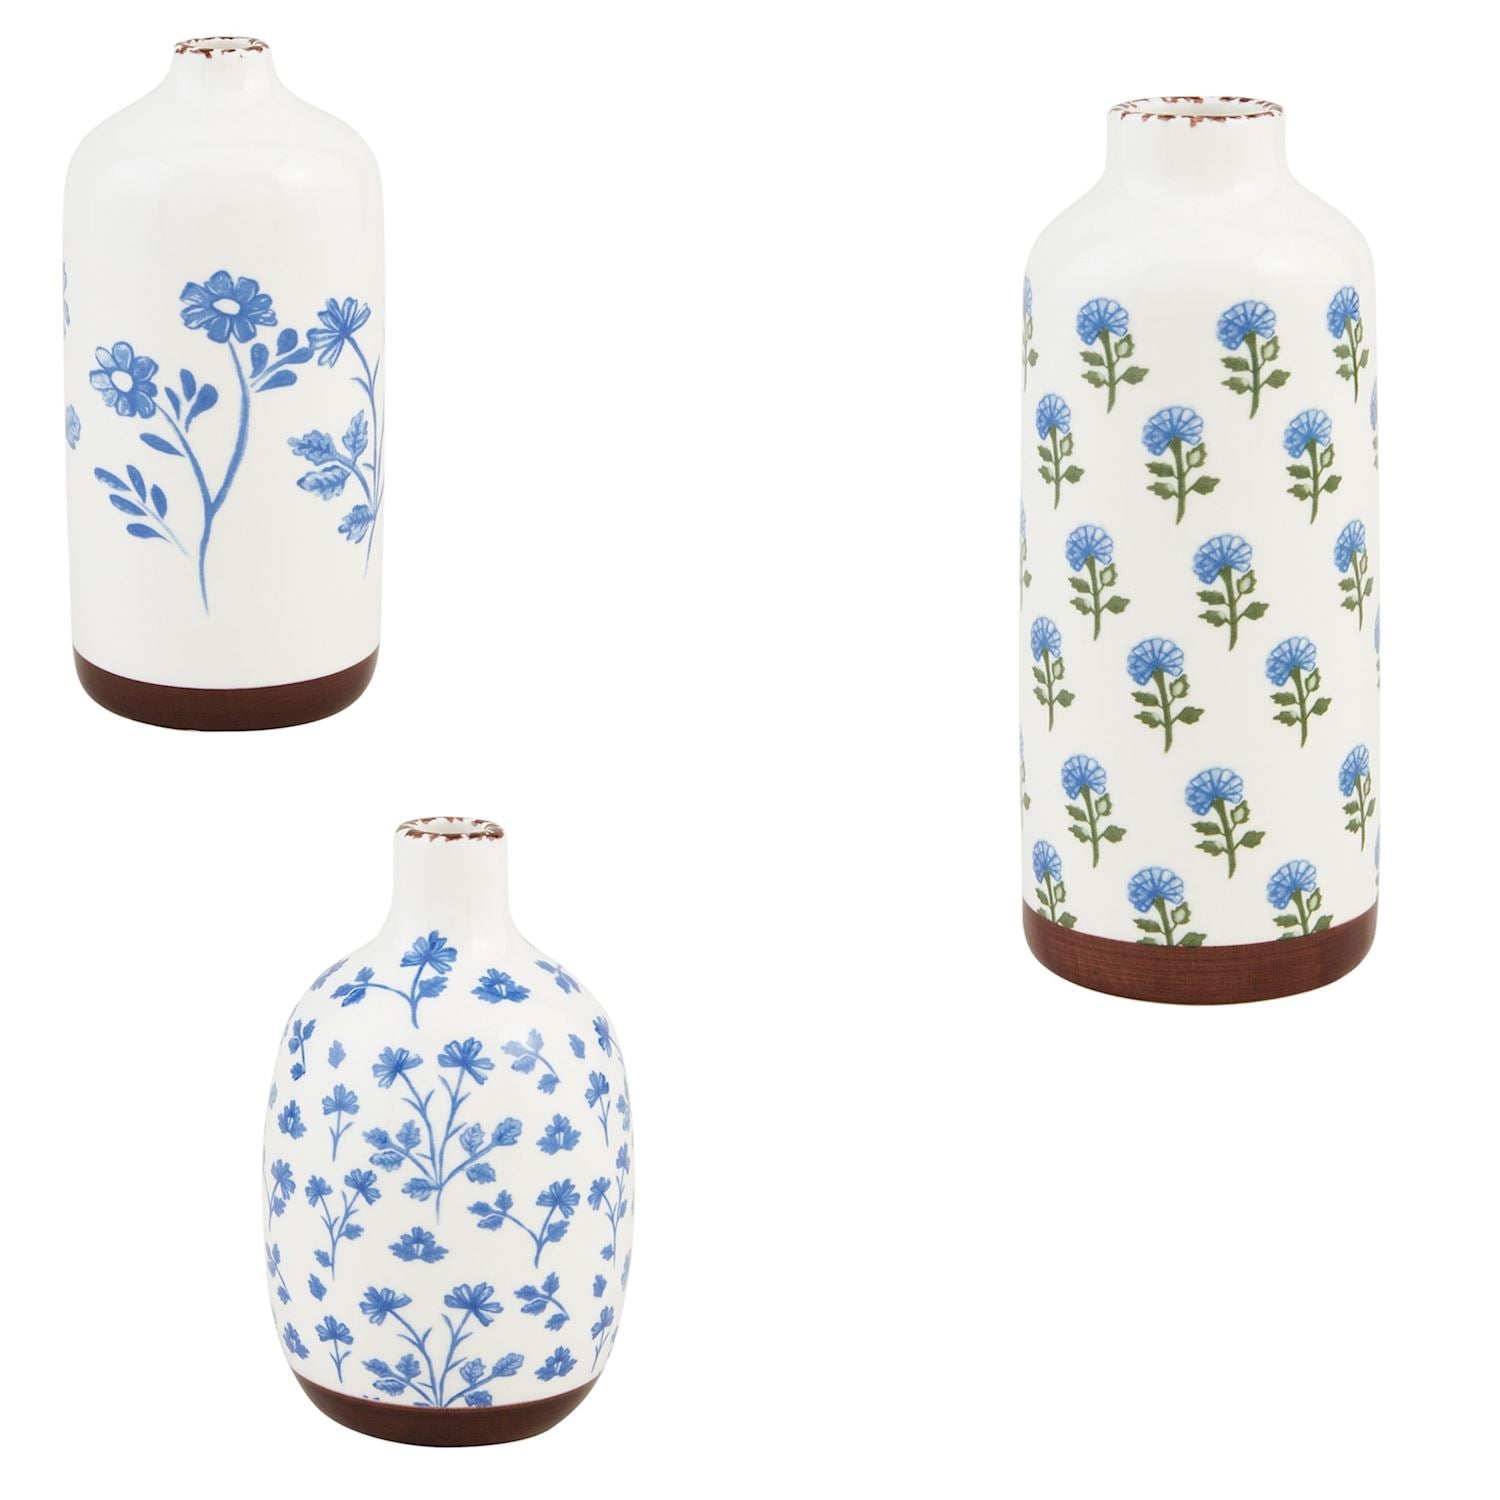 3 sizes and style of blue floral vases on a white background.